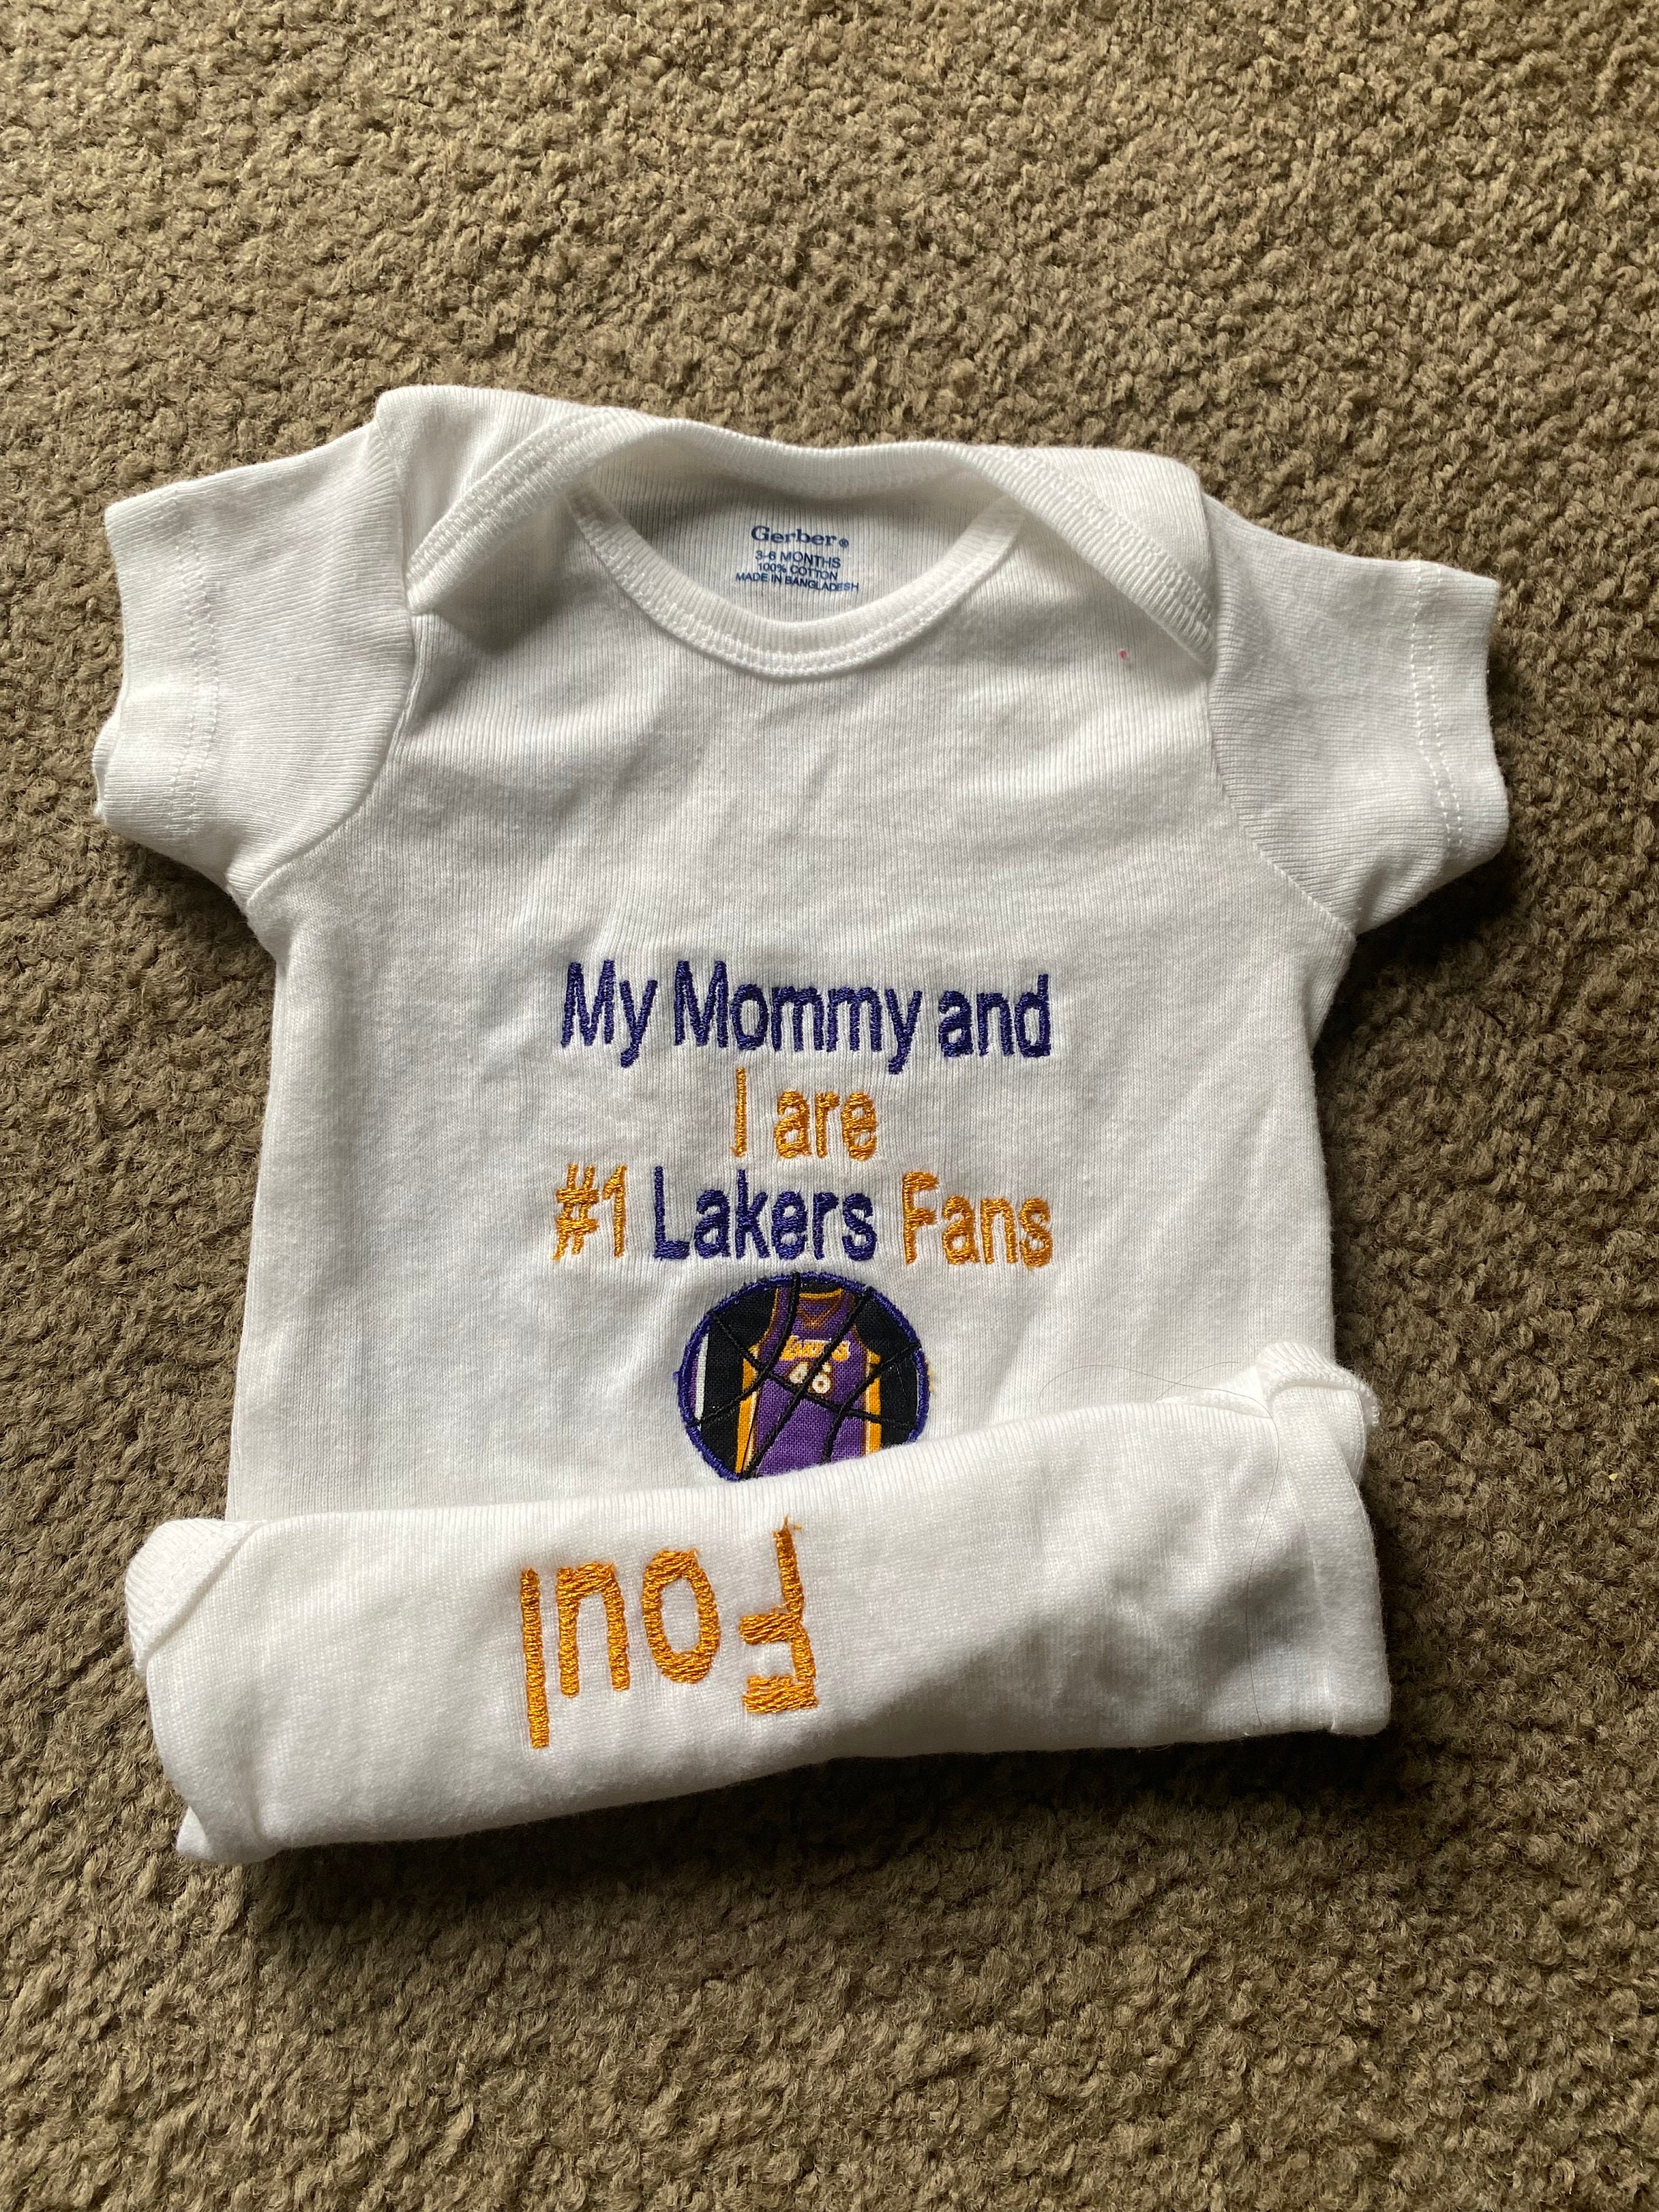 Los Angeles Lakers Baby Apparel, Baby Lakers Clothing, Merchandise